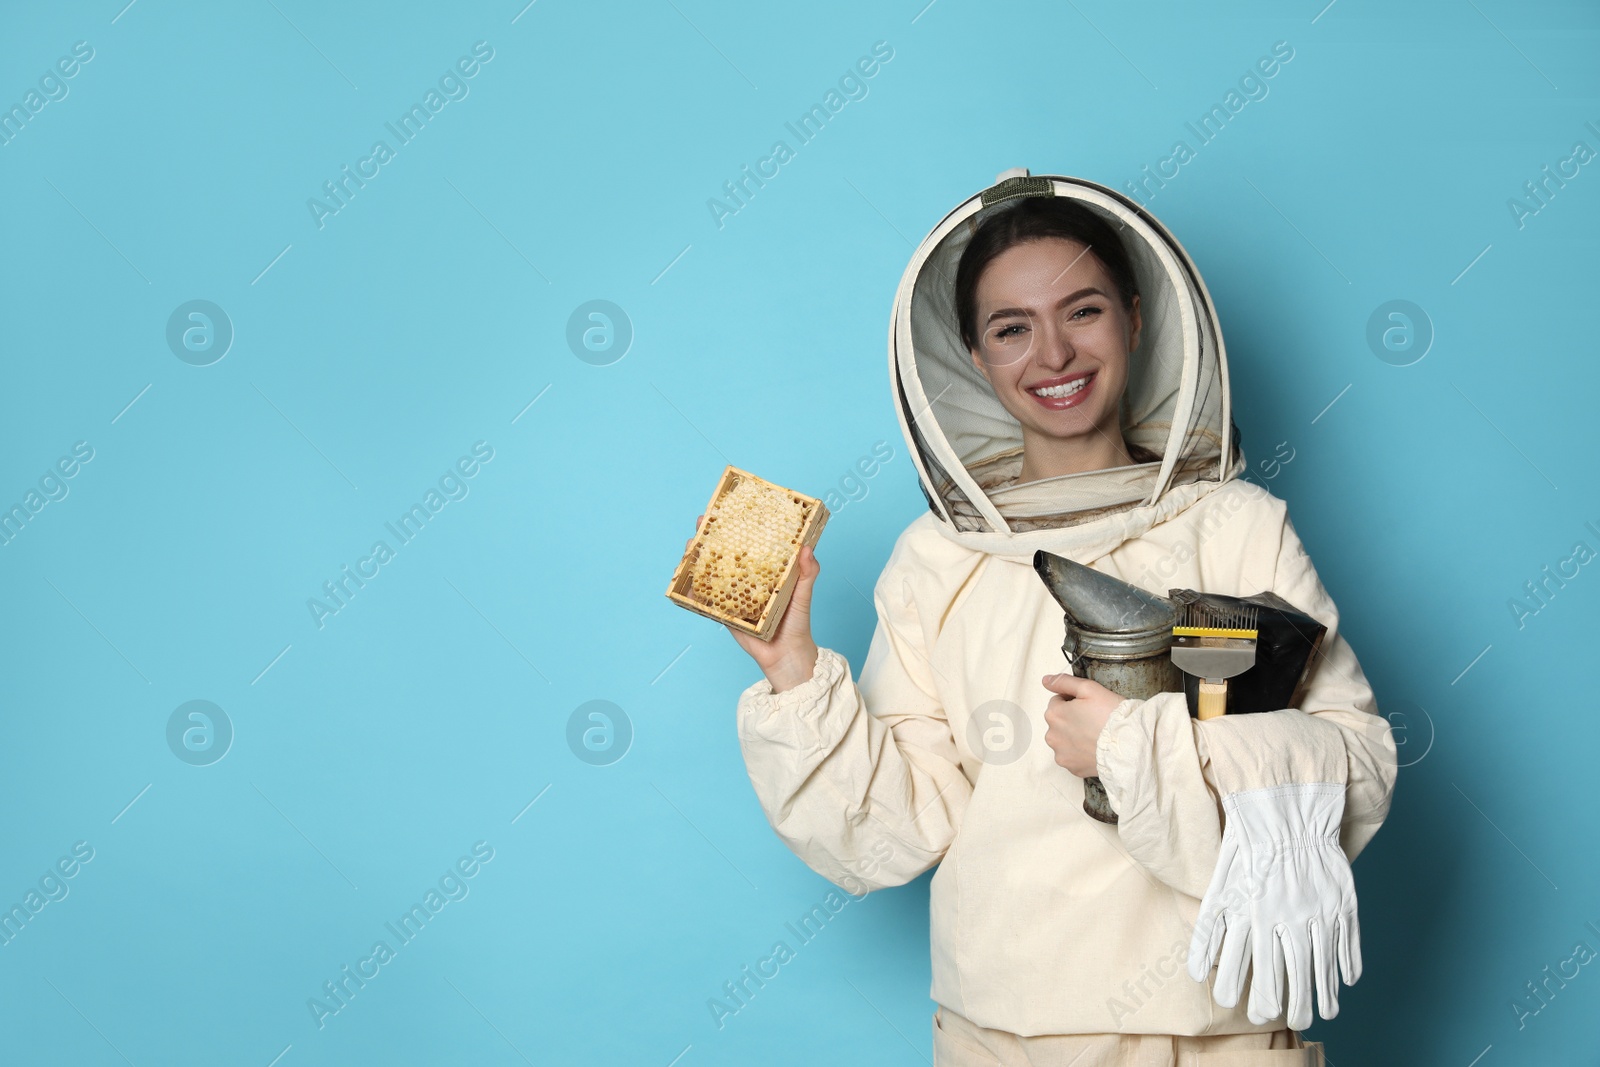 Photo of Beekeeper in uniform holding smokepot and hive frame with honeycomb on light blue background. Space for text